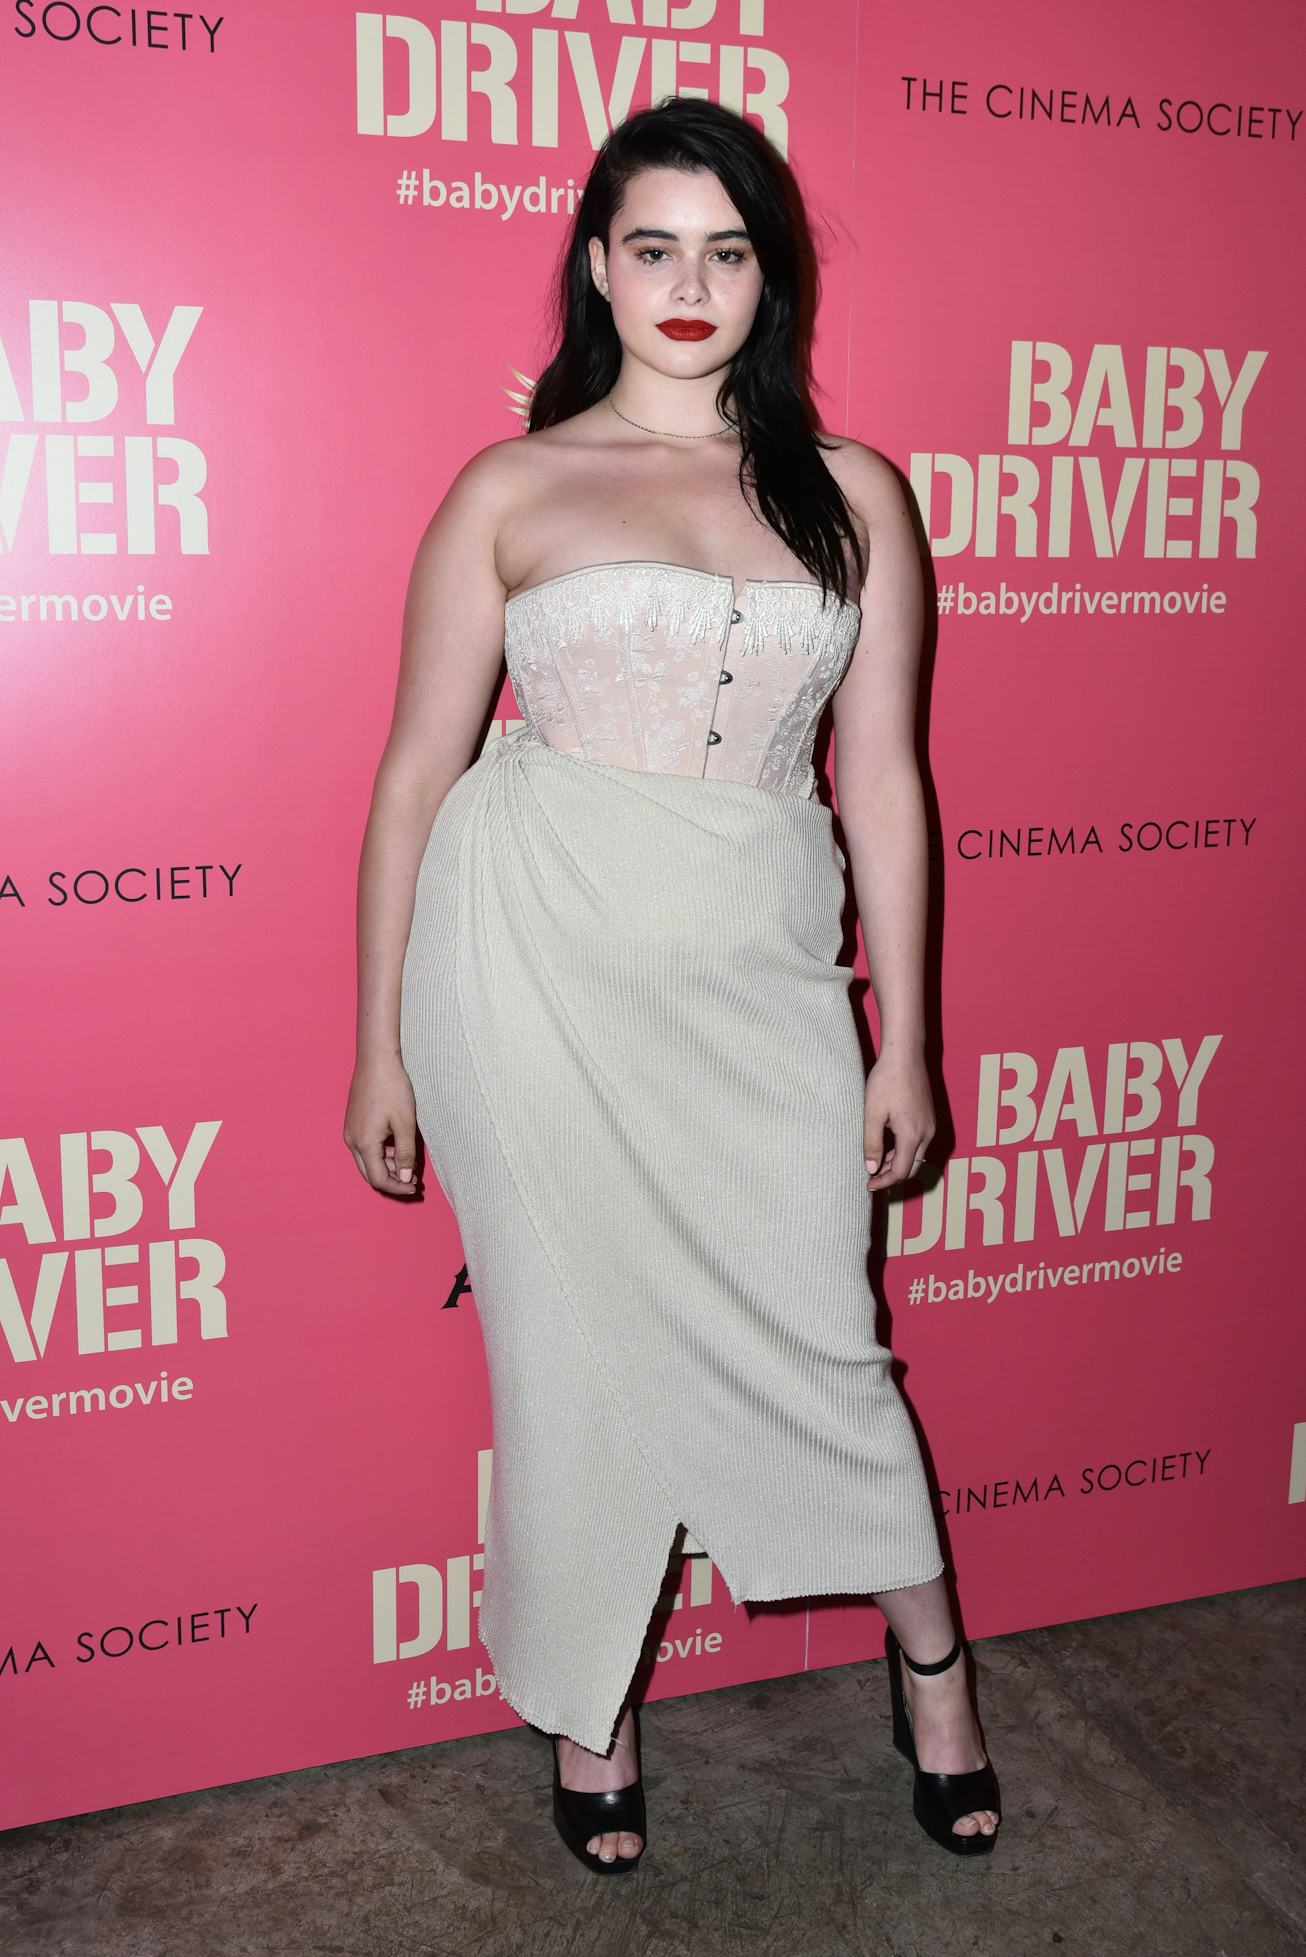 NEW YORK, NY - JUNE 26:  Barbie Ferreira attends TriStar Pictures with The Cinema Society & Avion ho...